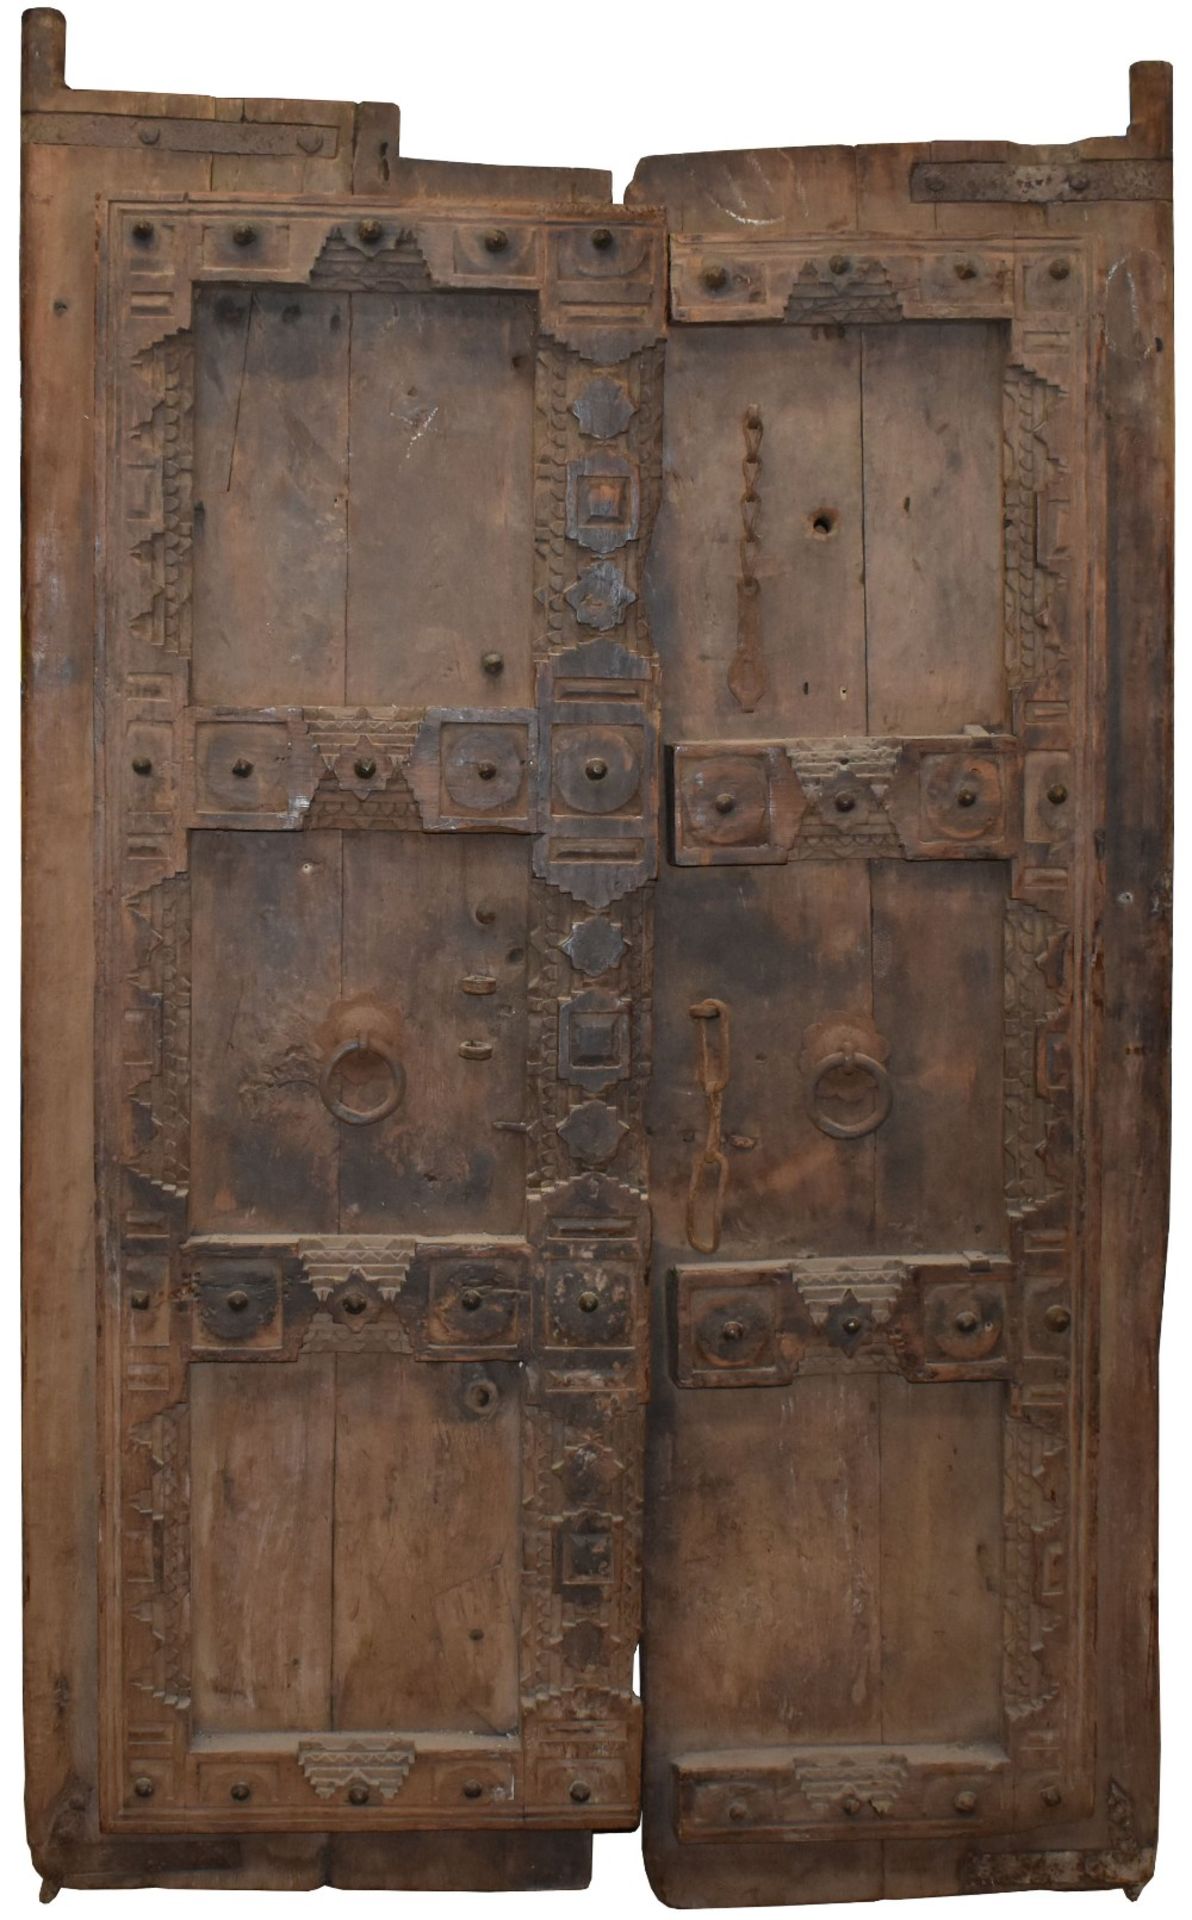 A pair of impressive 18th century teak and iron doors, possibly Spanish Colonial